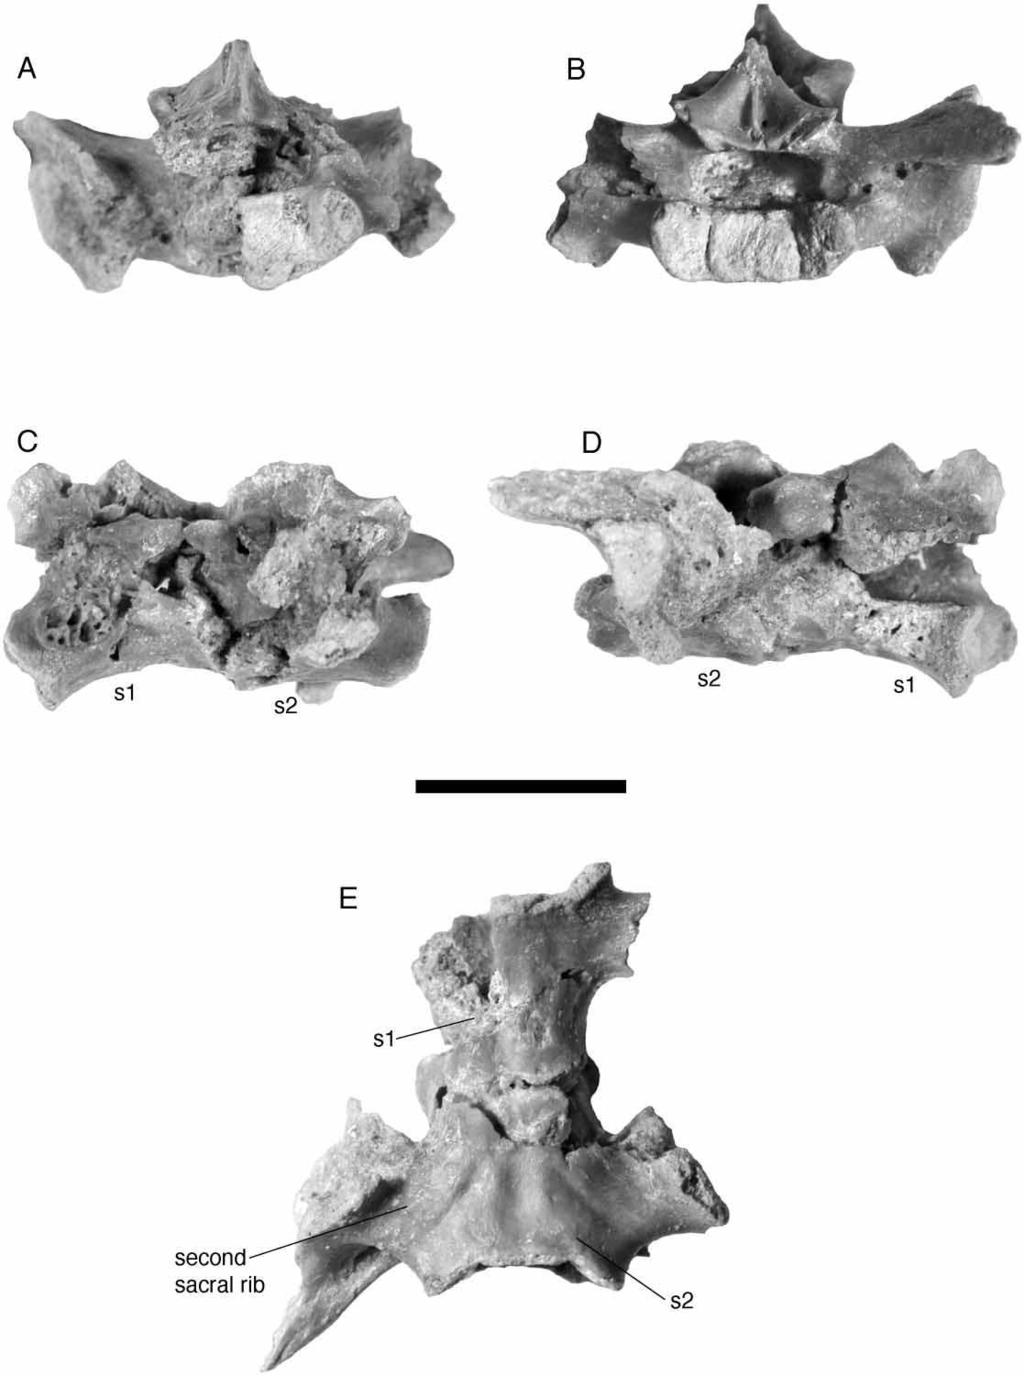 New Araripesuchus from Madagascar 311 Figure 64. FMNH PR 2301, Araripesuchus tsangatsangana. Partial sacrum in anterior (A), posterior (B), left lateral (C), right lateral (D) and ventral (E) view.